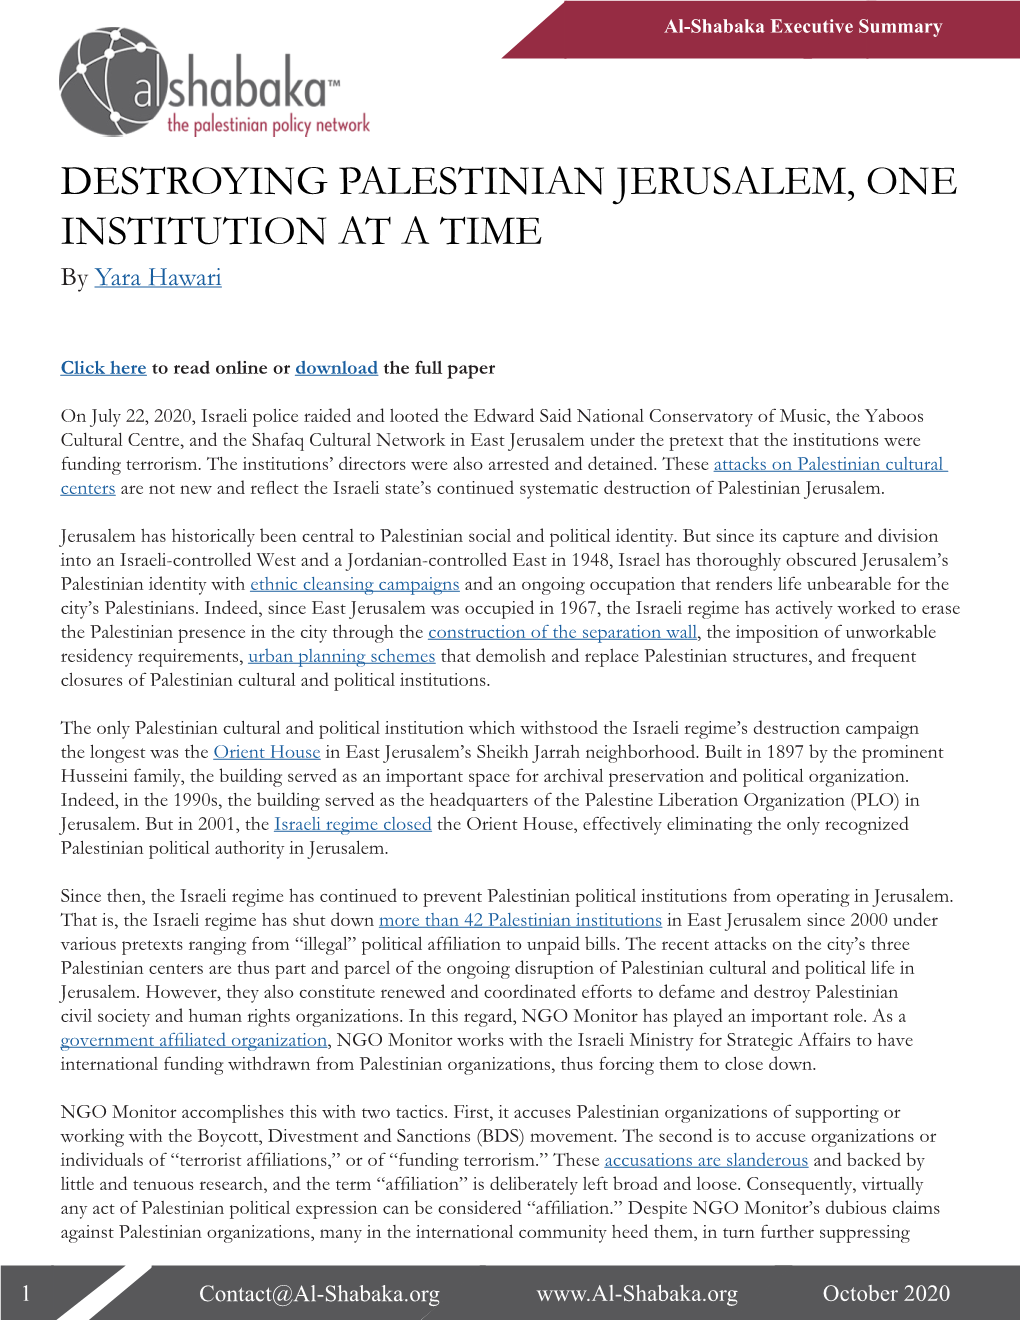 DESTROYING PALESTINIAN JERUSALEM, ONE INSTITUTION at a TIME by Yara Hawari